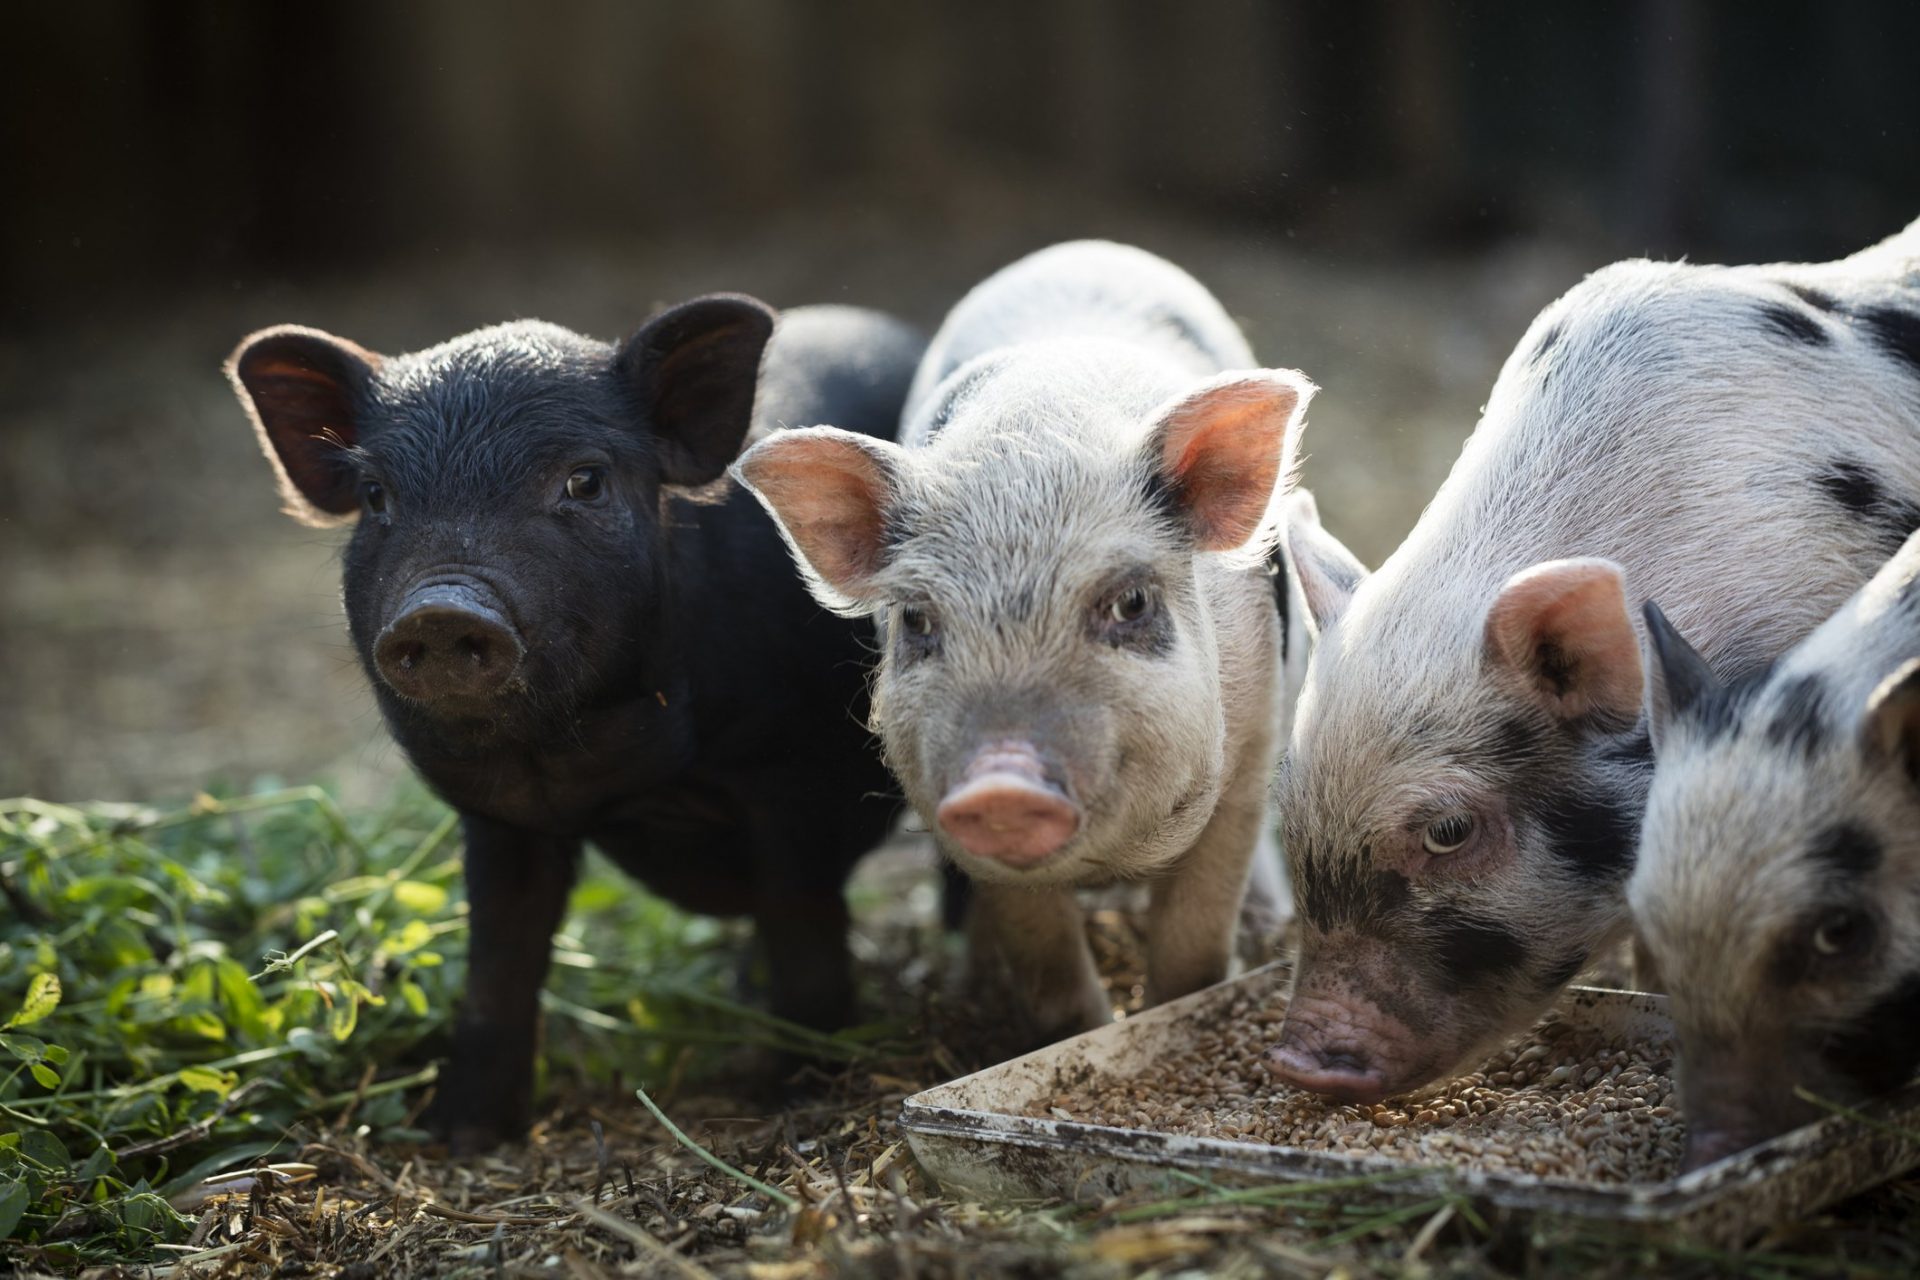 Pork producer issues warning over new California pig law: Initial prices could spike up to 50%